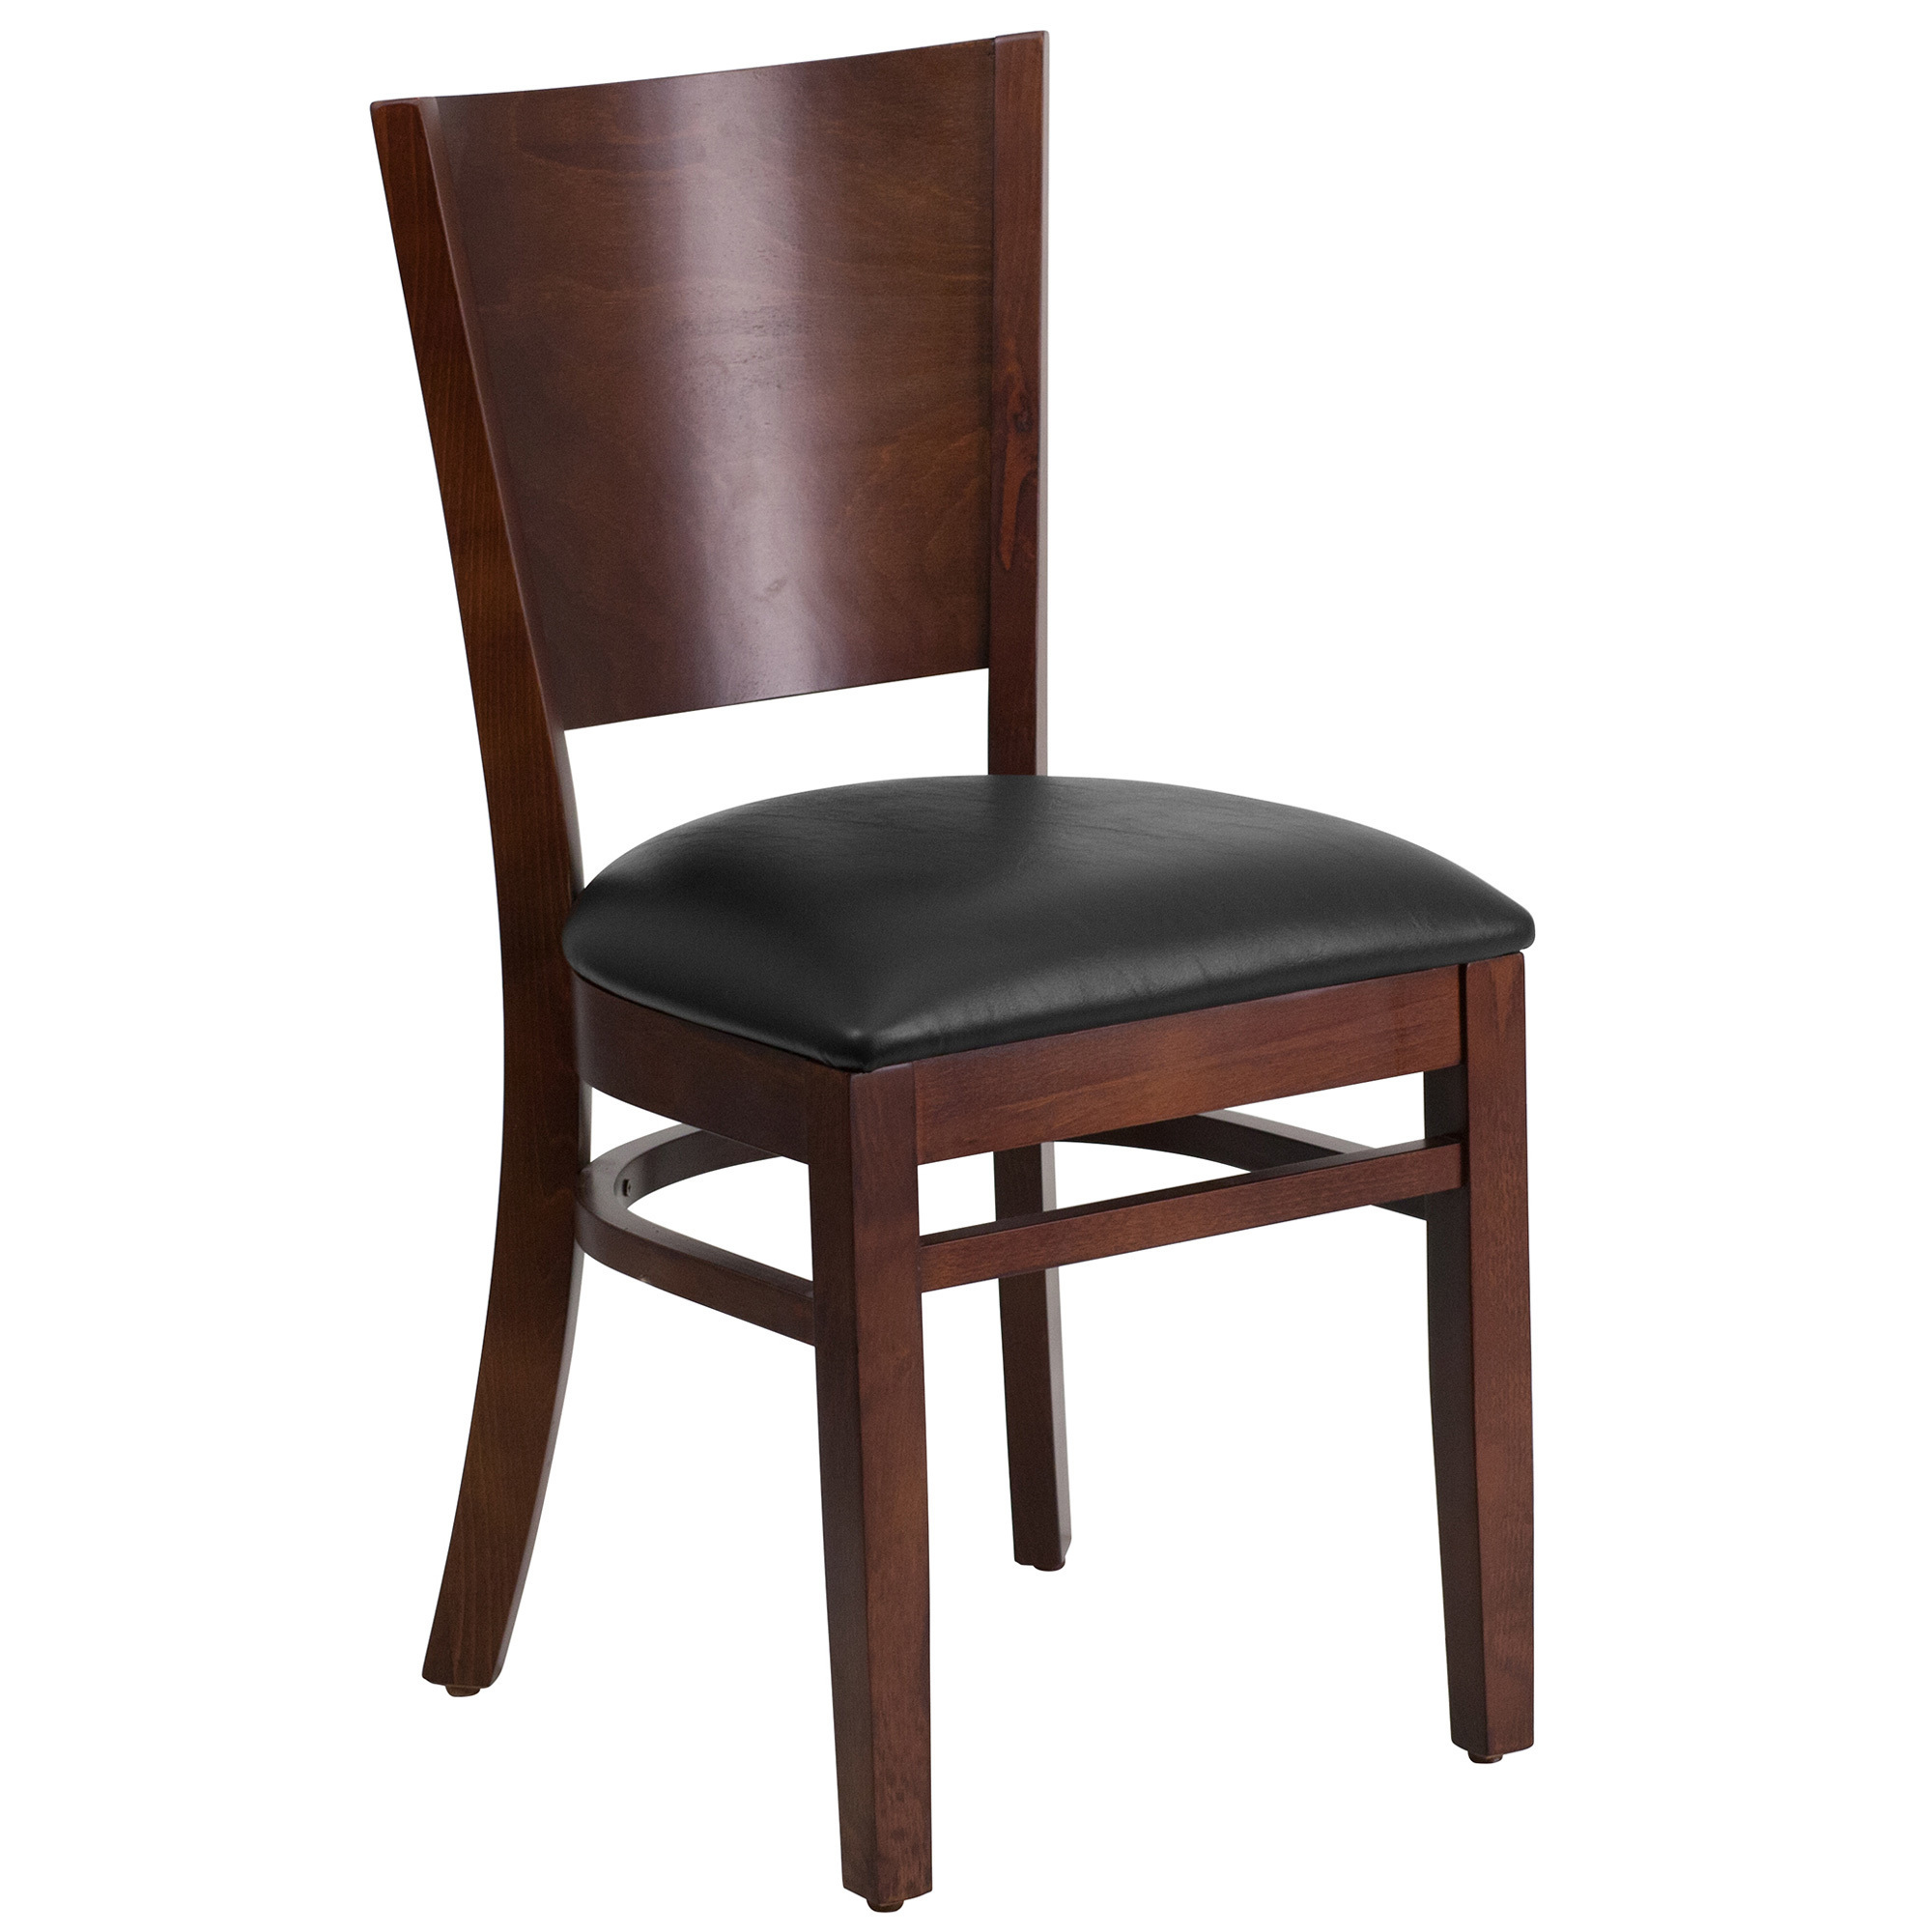 Flash Furniture Wood Chair with Padded Seat â Walnut Finish/Black Vinyl, 800-Lb. Capacity, 17 1/4Inch W x 20 1/2Inch D x 33 1/2Inch H, Model